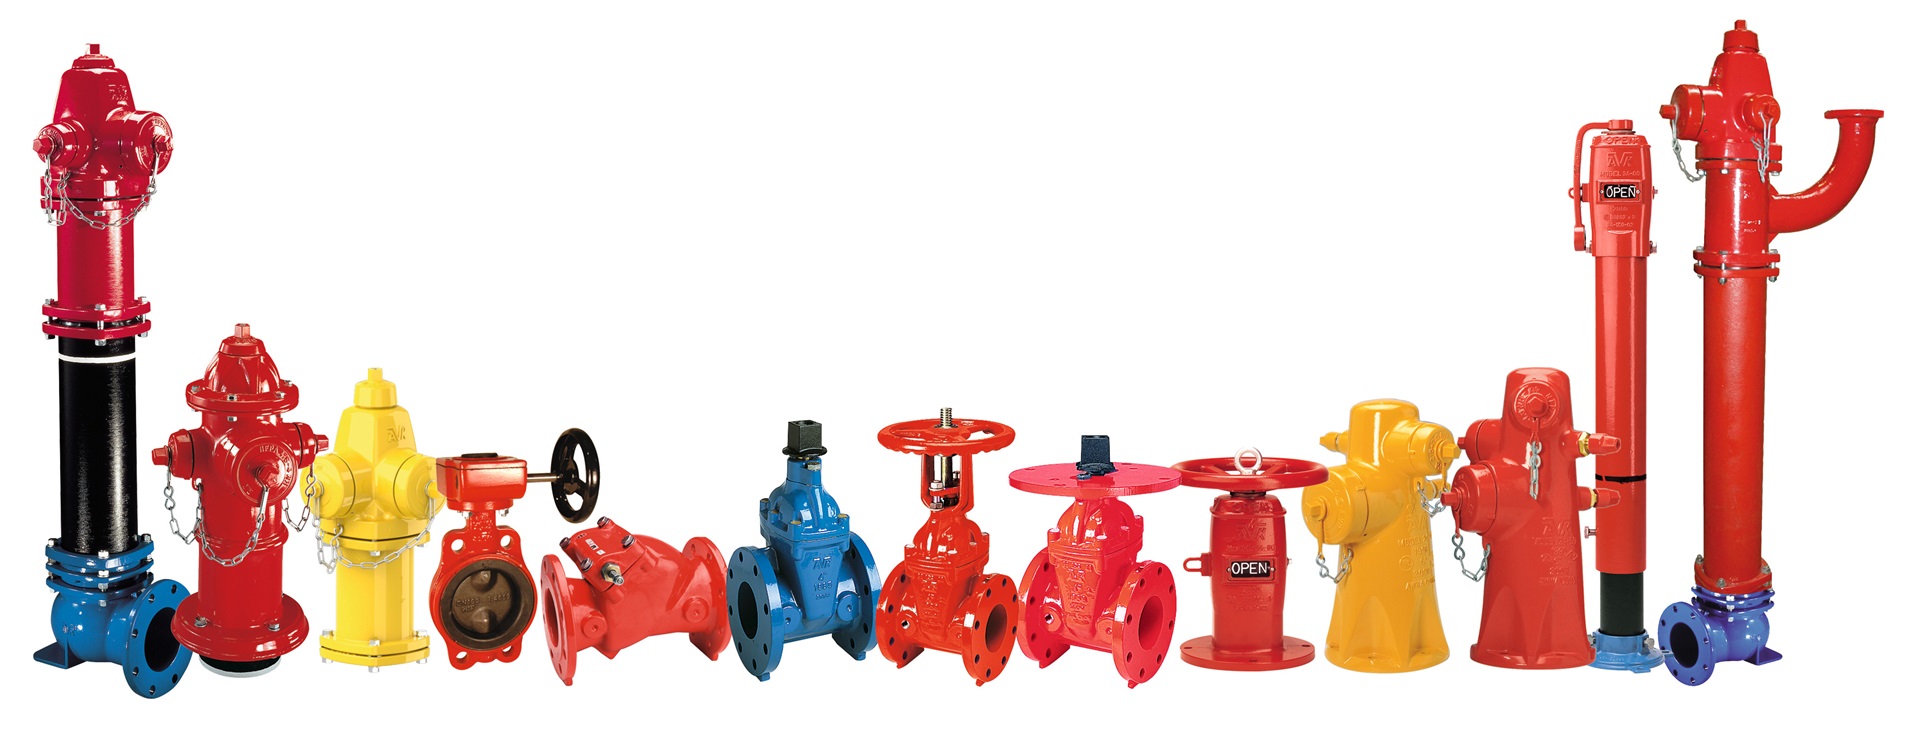 World, Fire,  Hight Quality, AVK, Valves, Solutions, QUALITY, SUSTAINABILITY, Environment, Corporate social responsibility, fire fair, fire hydrants, Fire Protection, Water when you really need it, DIN, BS, AWWA, AS, JIS, UL/F, VdS